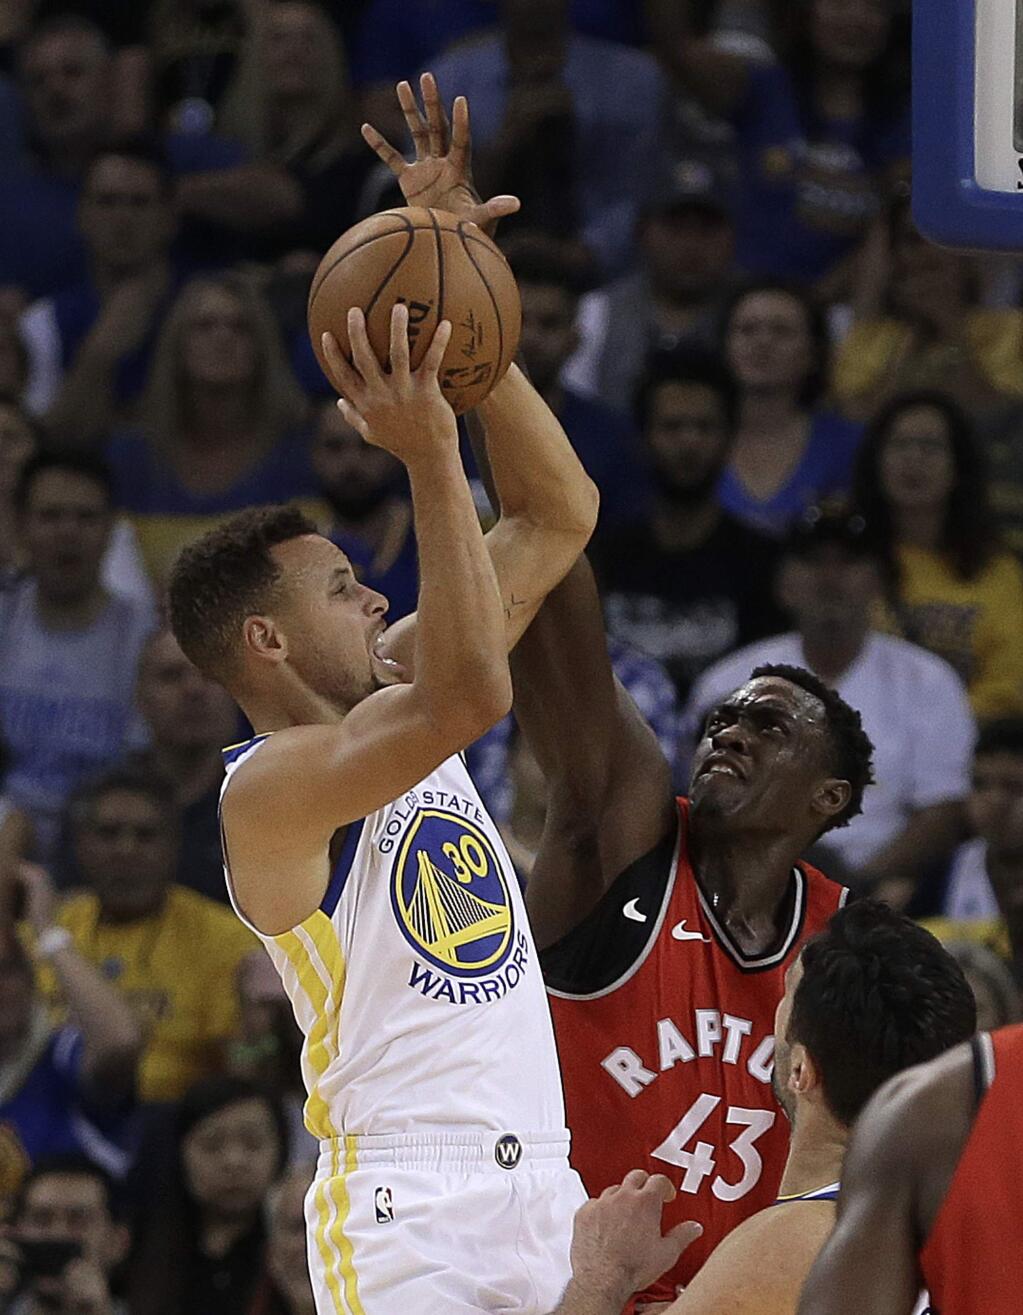 Golden State Warriors' Stephen Curry, left, shoots against Toronto Raptors' Pascal Siakam during the first half of an NBA basketball game Wednesday, Oct. 25, 2017, in Oakland, Calif. (AP Photo/Ben Margot)